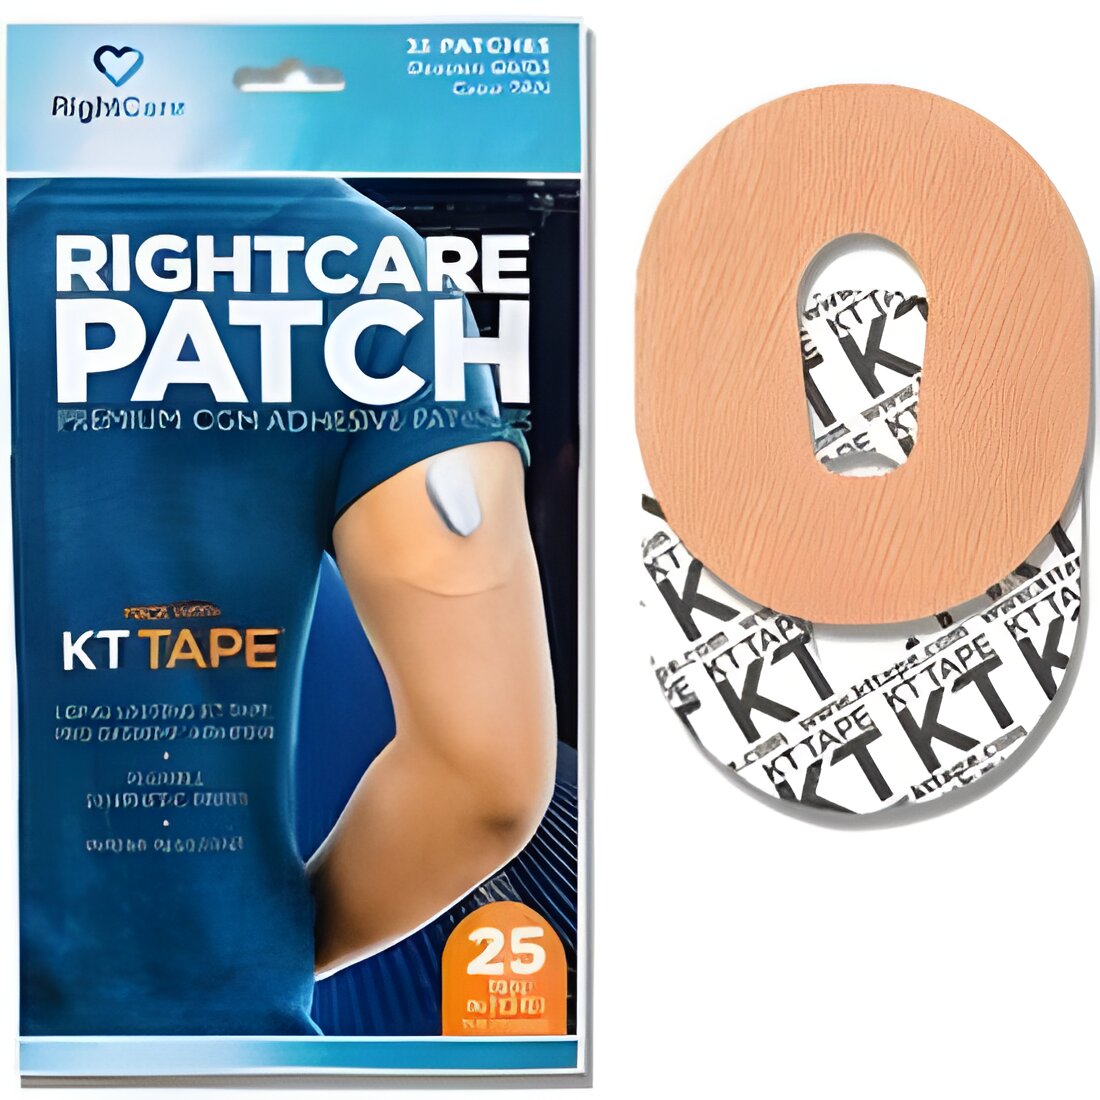 Free RightCare Patches Sample